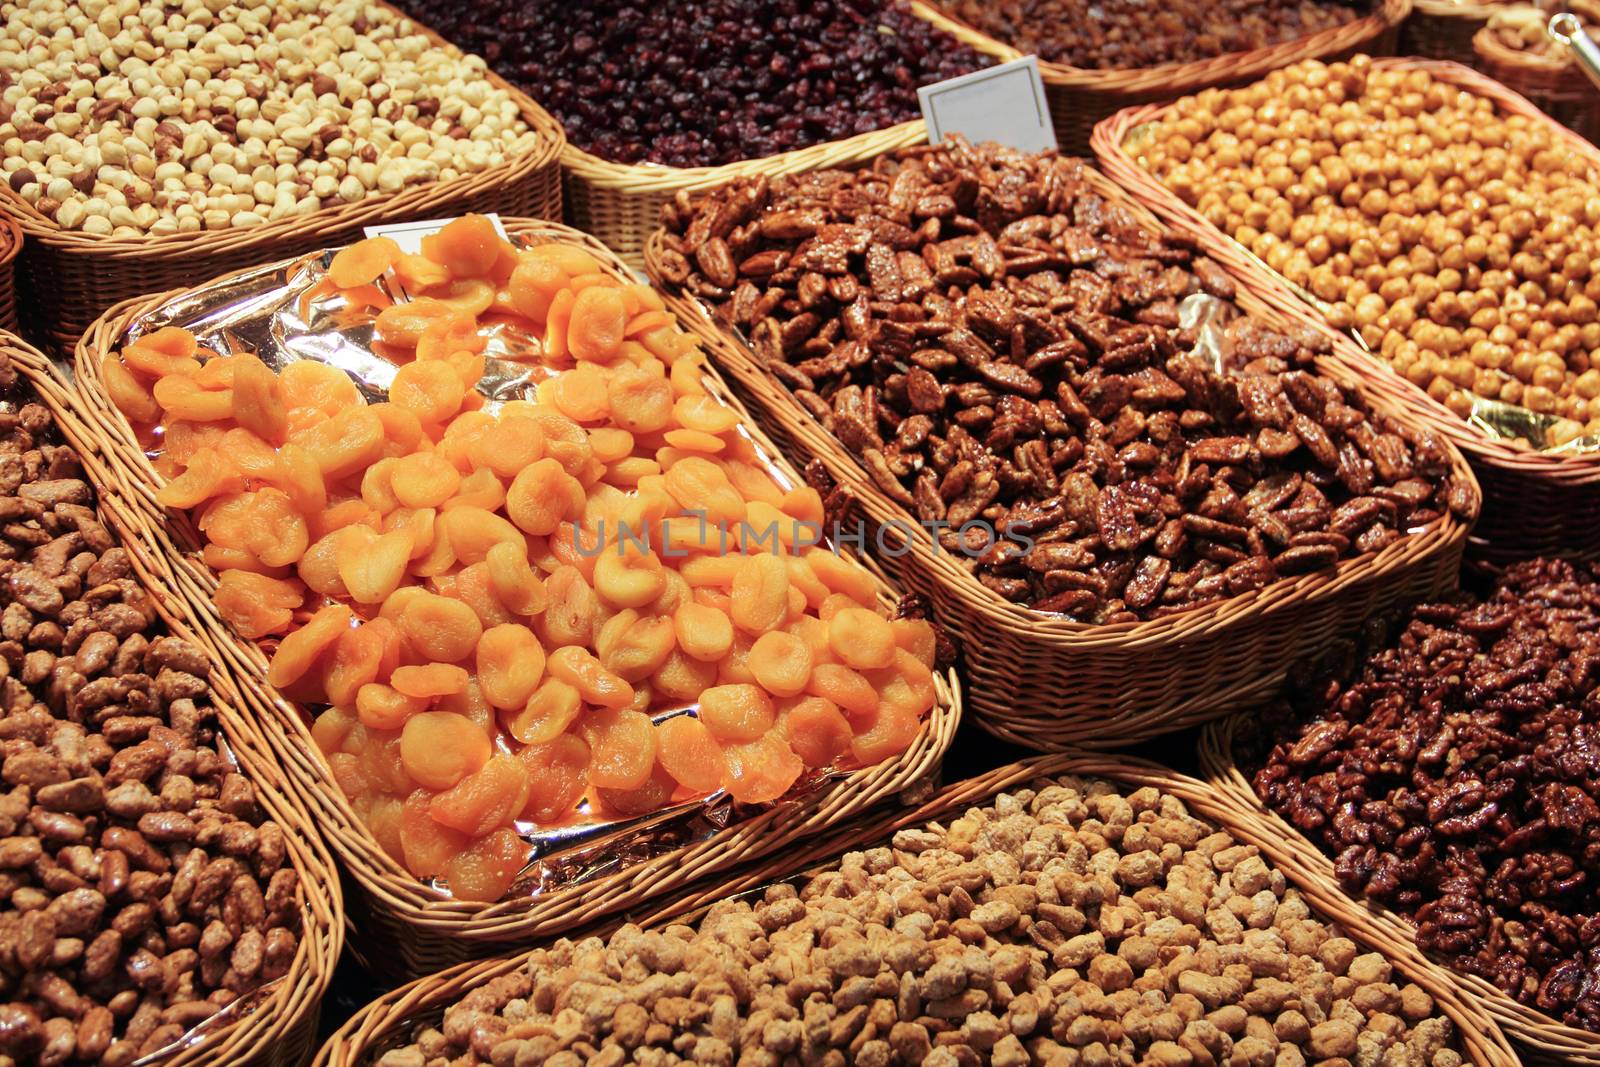 Dry fruits nuts and snacks on the market stall close up